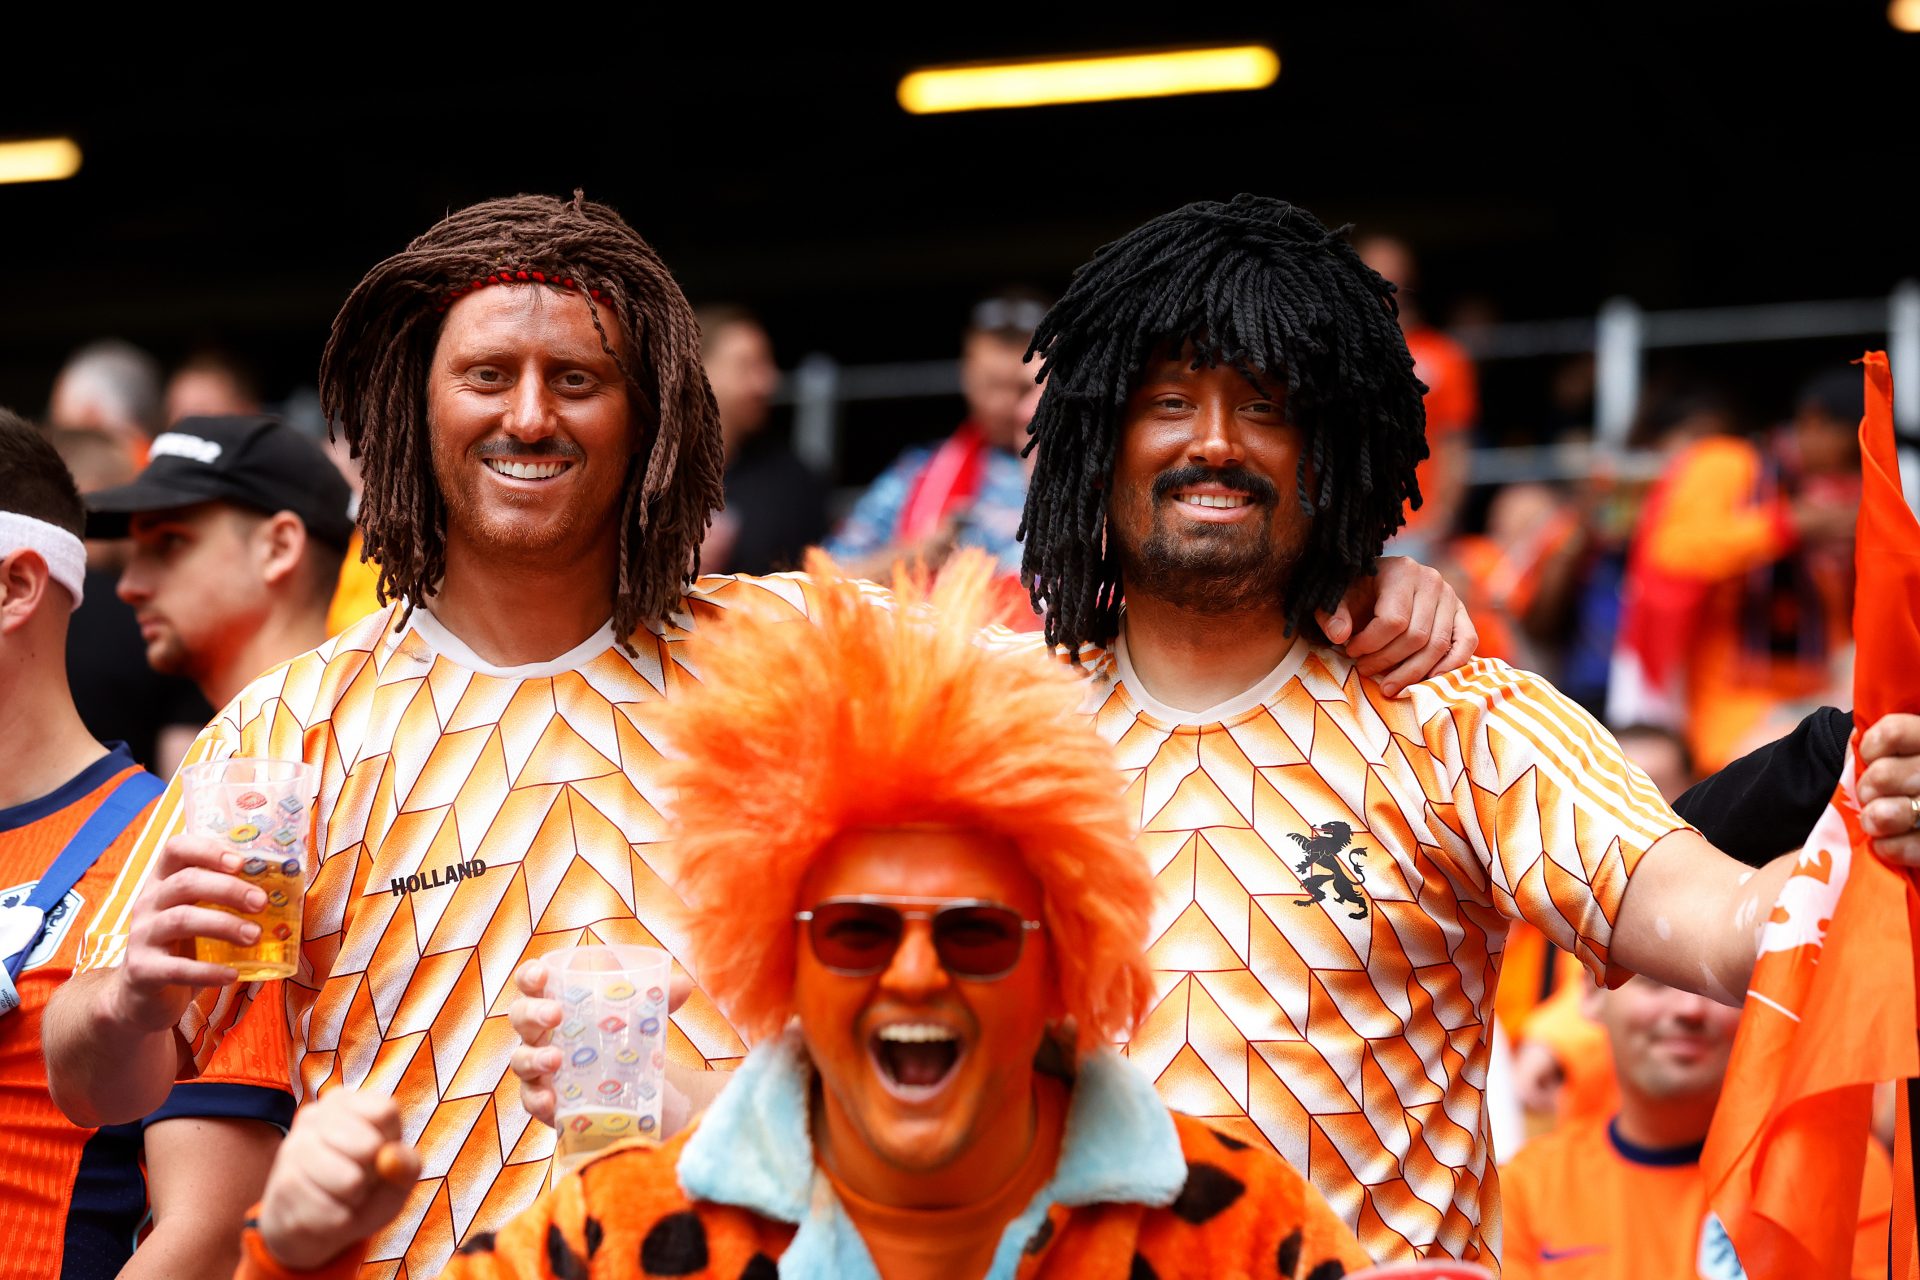 Ruud Gullit responds to Euros costume controversy